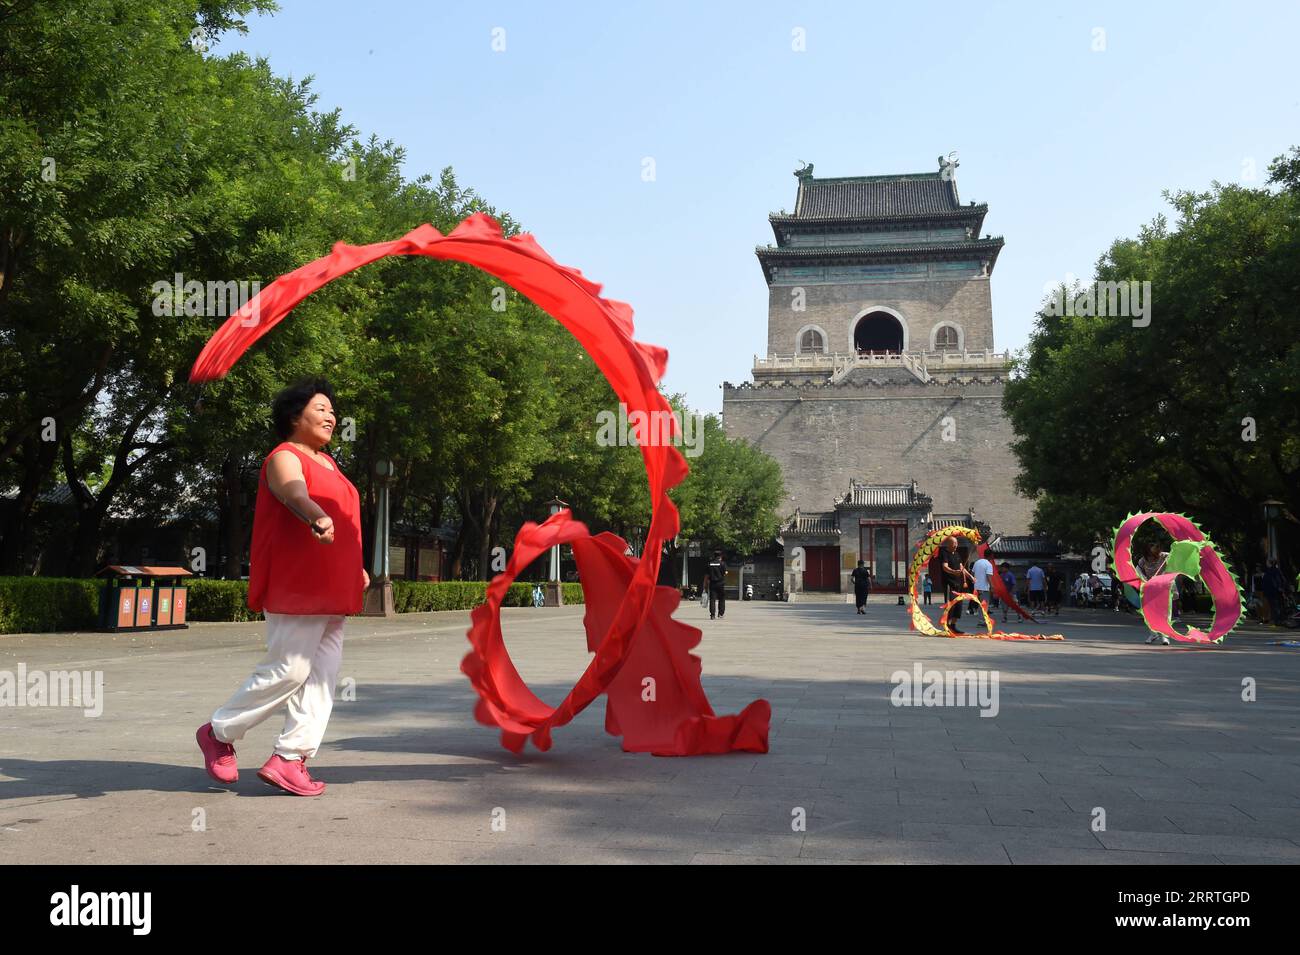 230725 -- BEIJING, July 25, 2023 -- People exercise in front of the Bell Tower in Beijing, capital of China, July 18, 2023. First created in the Yuan Dynasty 1271-1368, the Beijing Central Axis, or Zhongzhouxian, stretches 7.8 kilometers between the Yongding Gate in the south of the city and the Drum Tower and Bell Tower in the north. Most of the major old-city buildings of Beijing sit along this axis. Gates, palaces, temples, squares and gardens of the old city are all linked up to the axis. As they witnessed the folk activities along the line from old days to new ones, they themselves are a Stock Photo